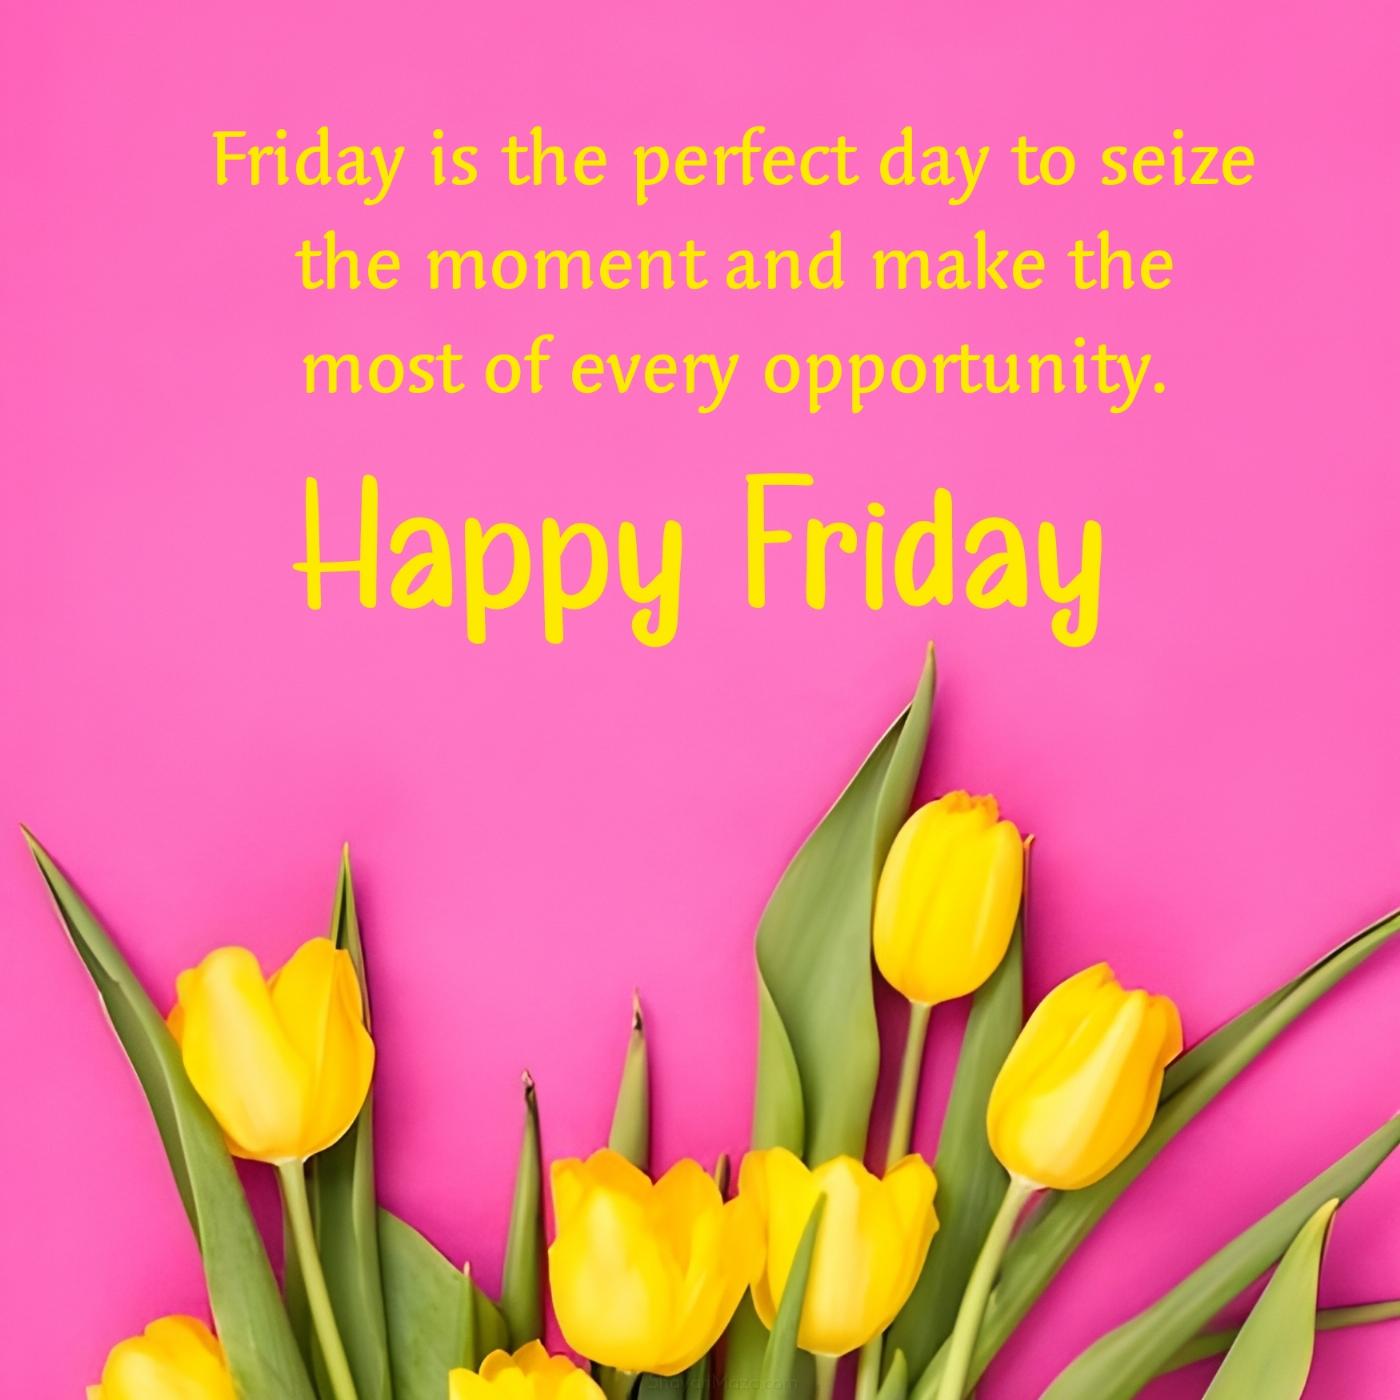 Friday is the perfect day to seize the moment and make the most of every opportunity